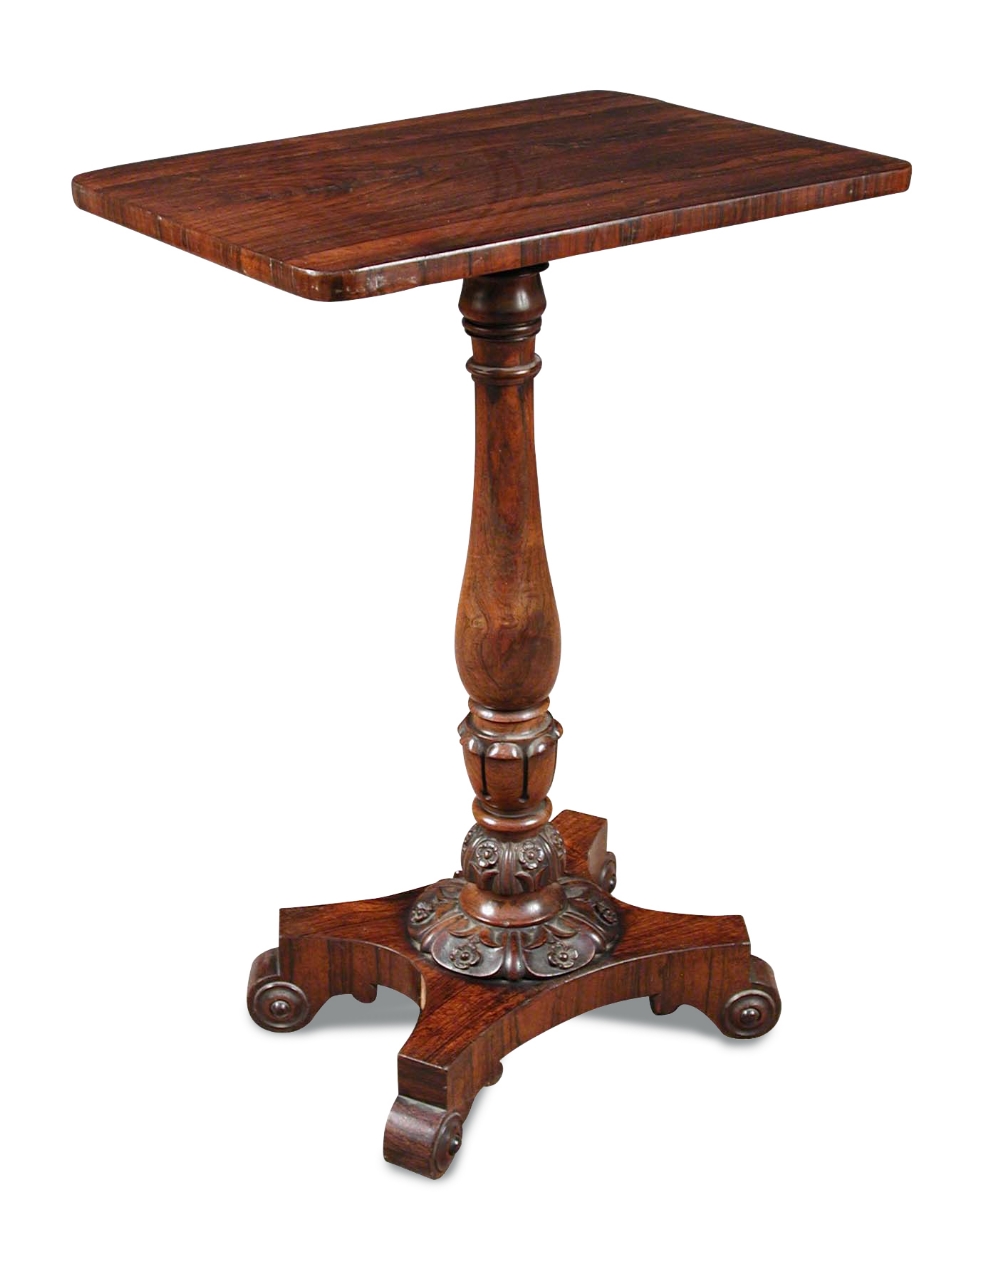 A late Regency rosewood pedestal table, the baluster turned column with carved lapit and foliate